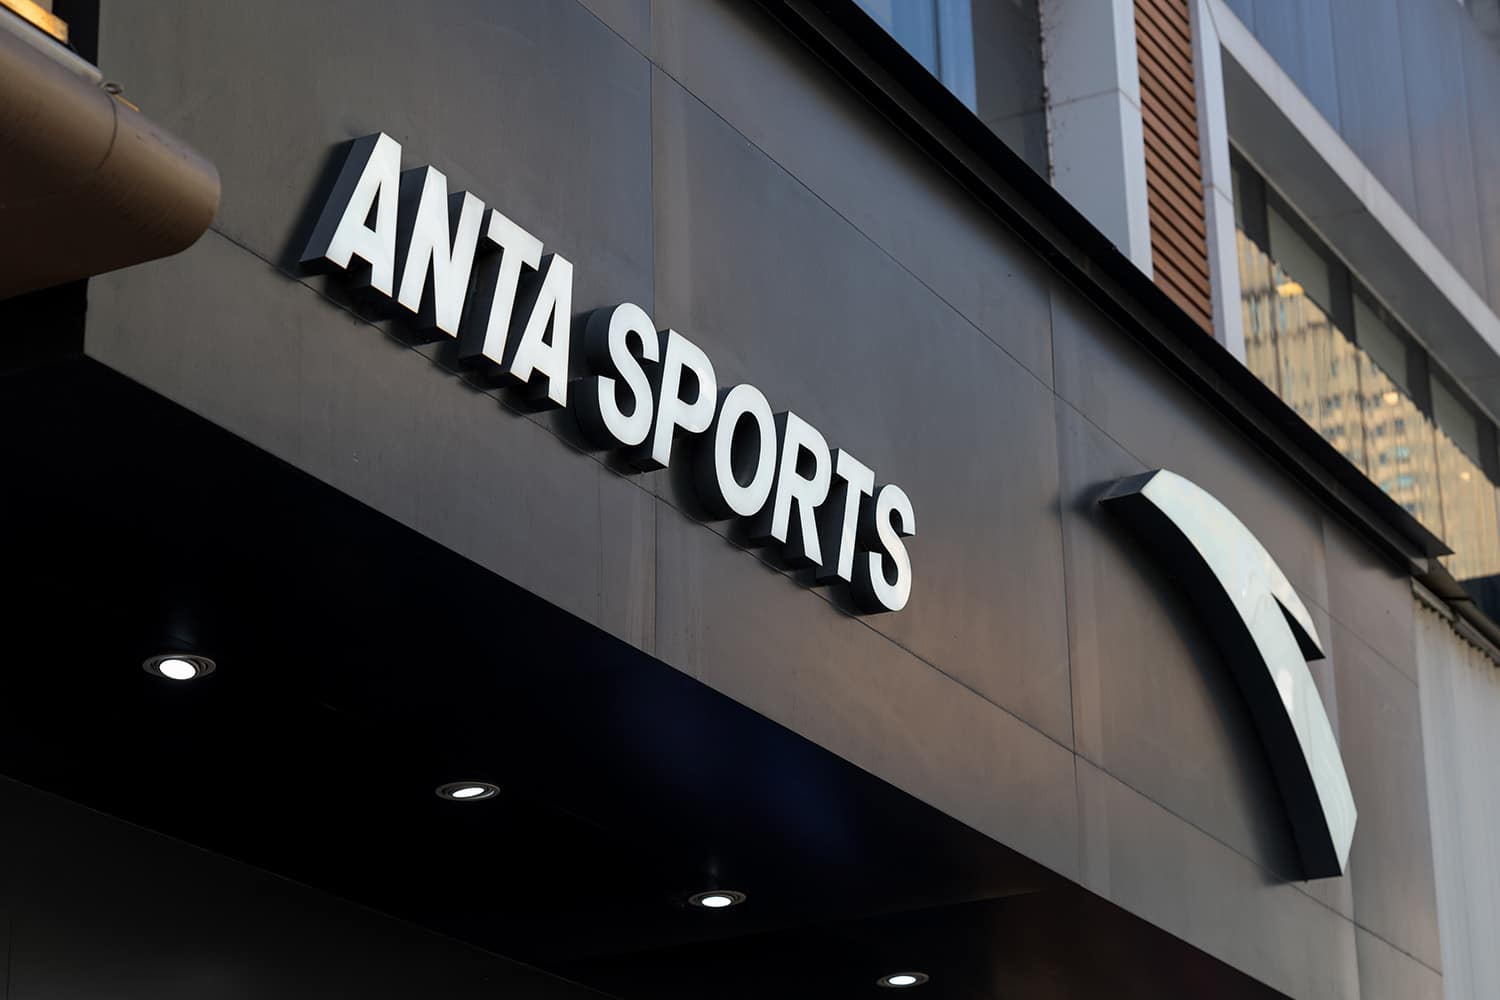 Anta Sports is the First Company in China to Join the Better